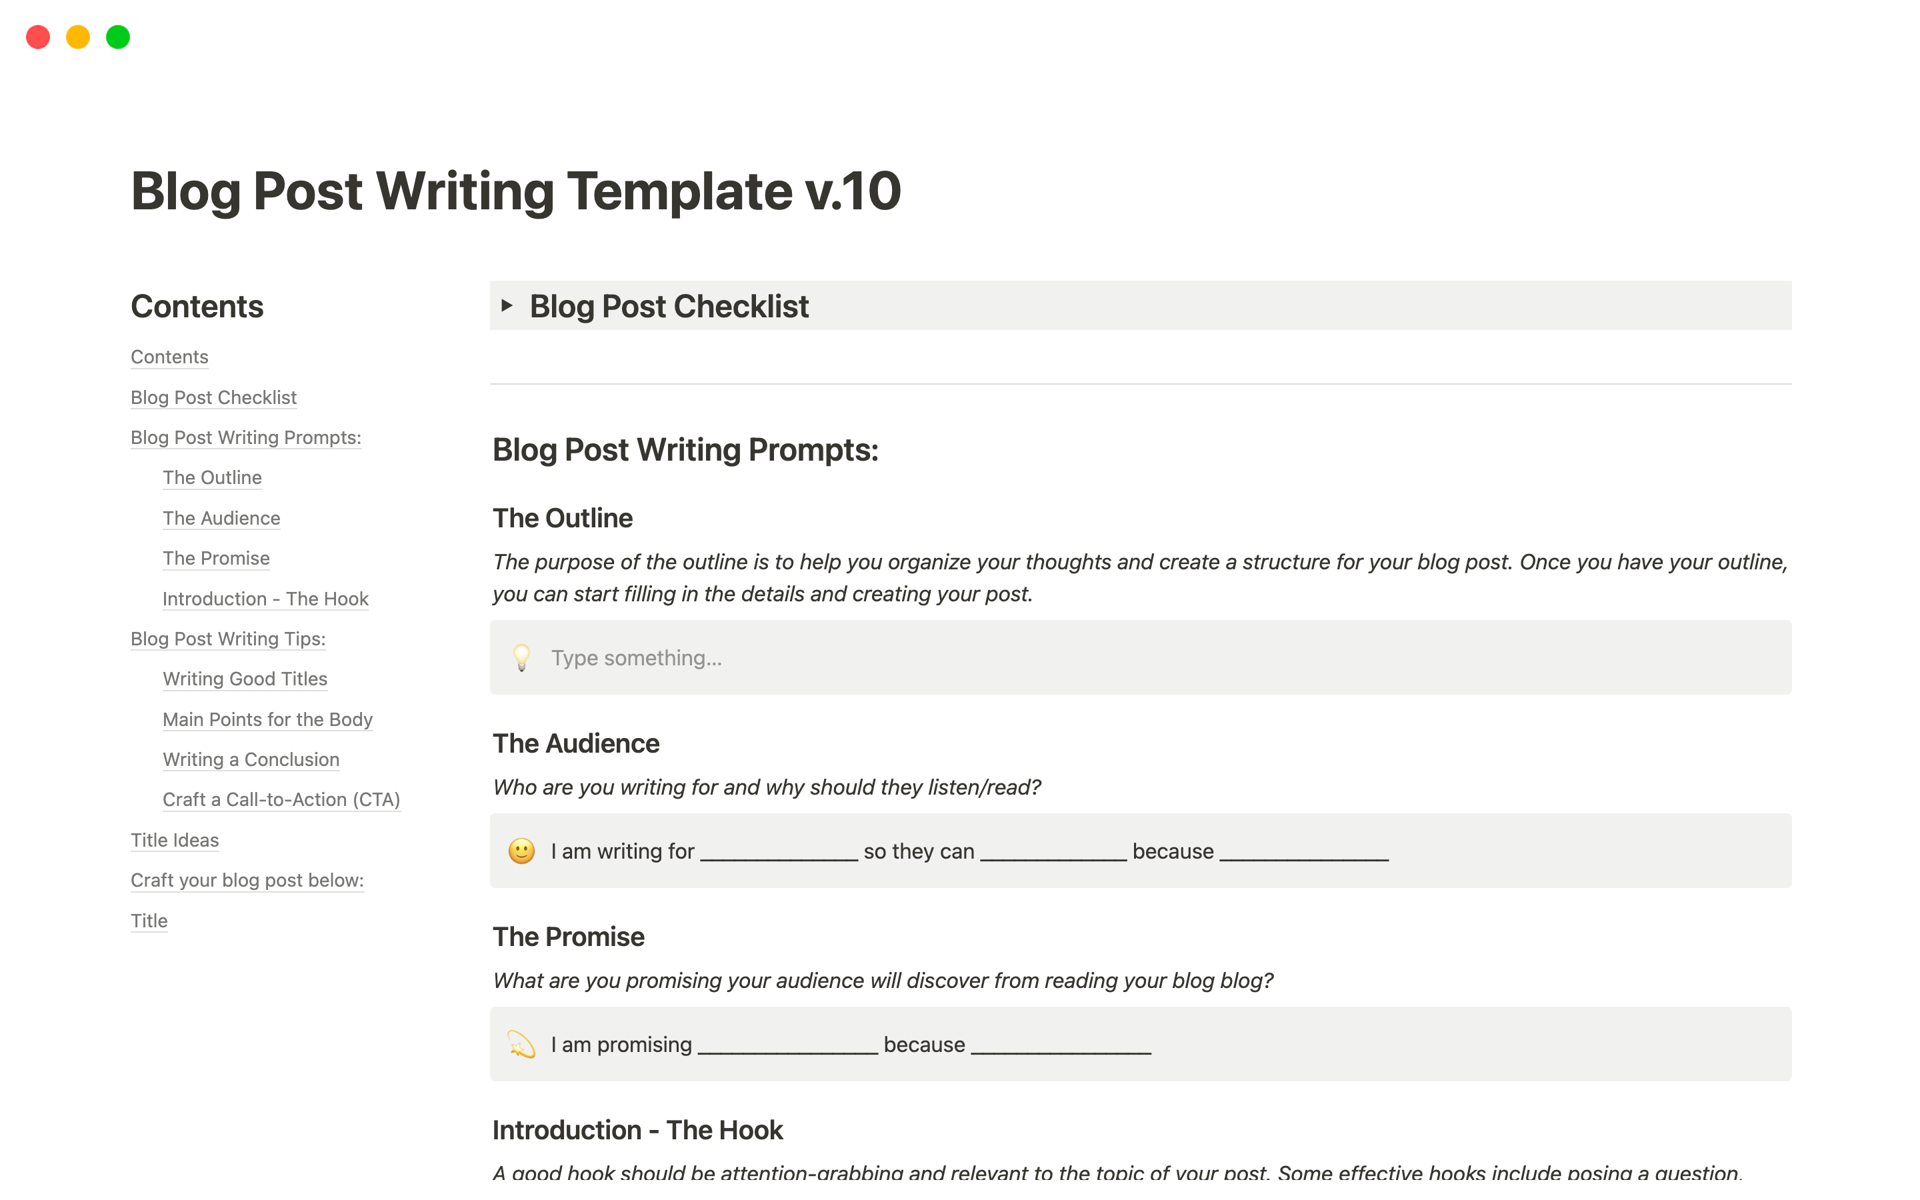 Use this Notion template to help speed up your content writing process!